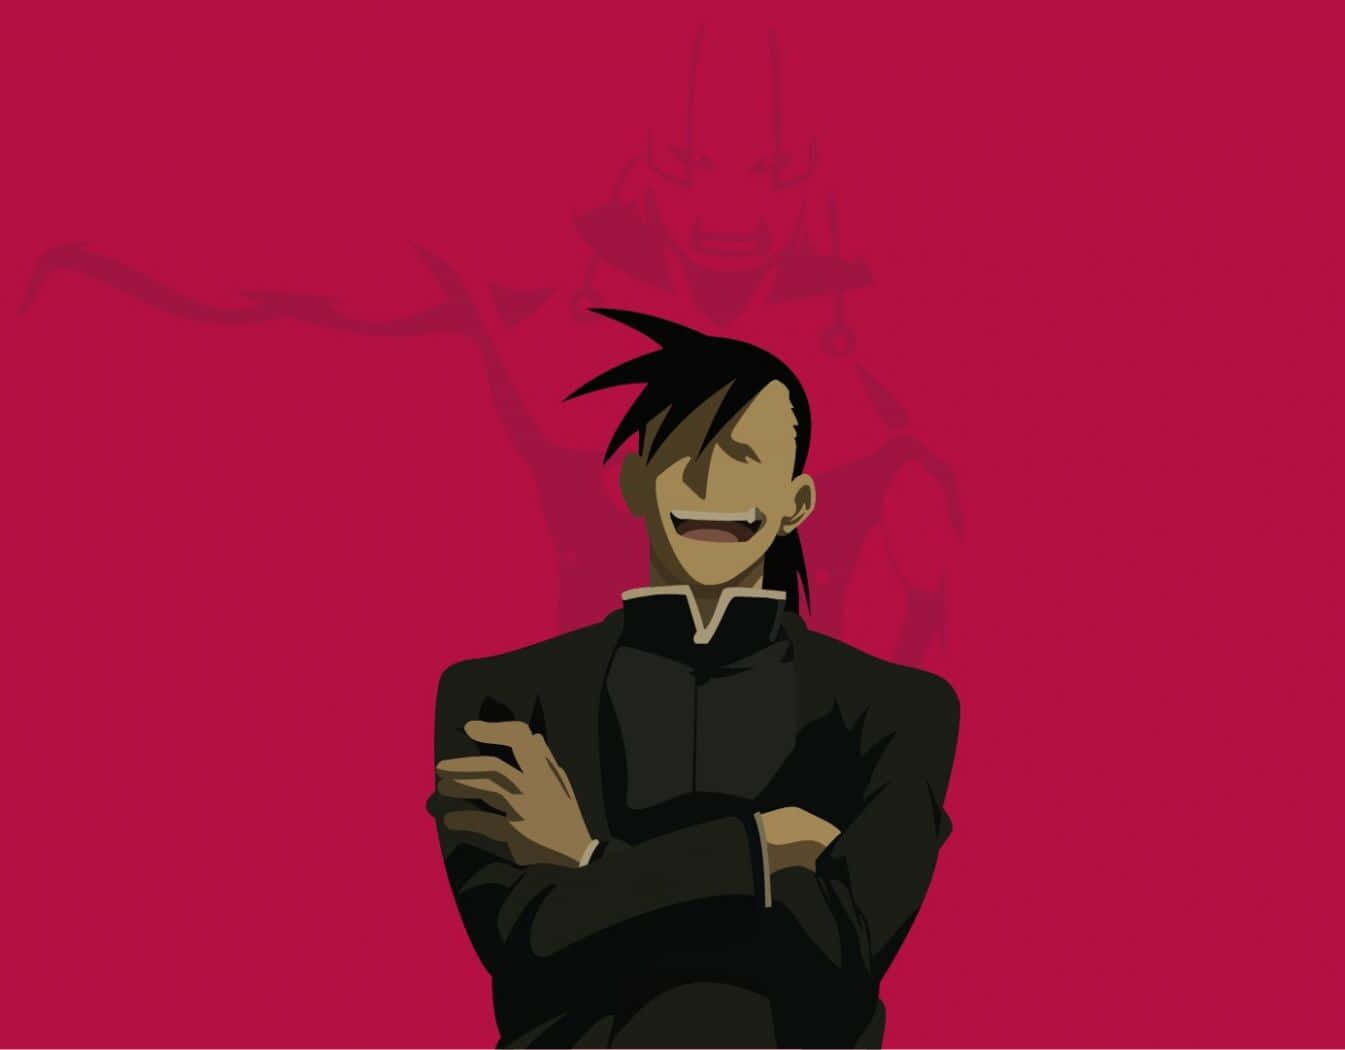 Ling Yao showing his charismatic personality in Fullmetal Alchemist Wallpaper